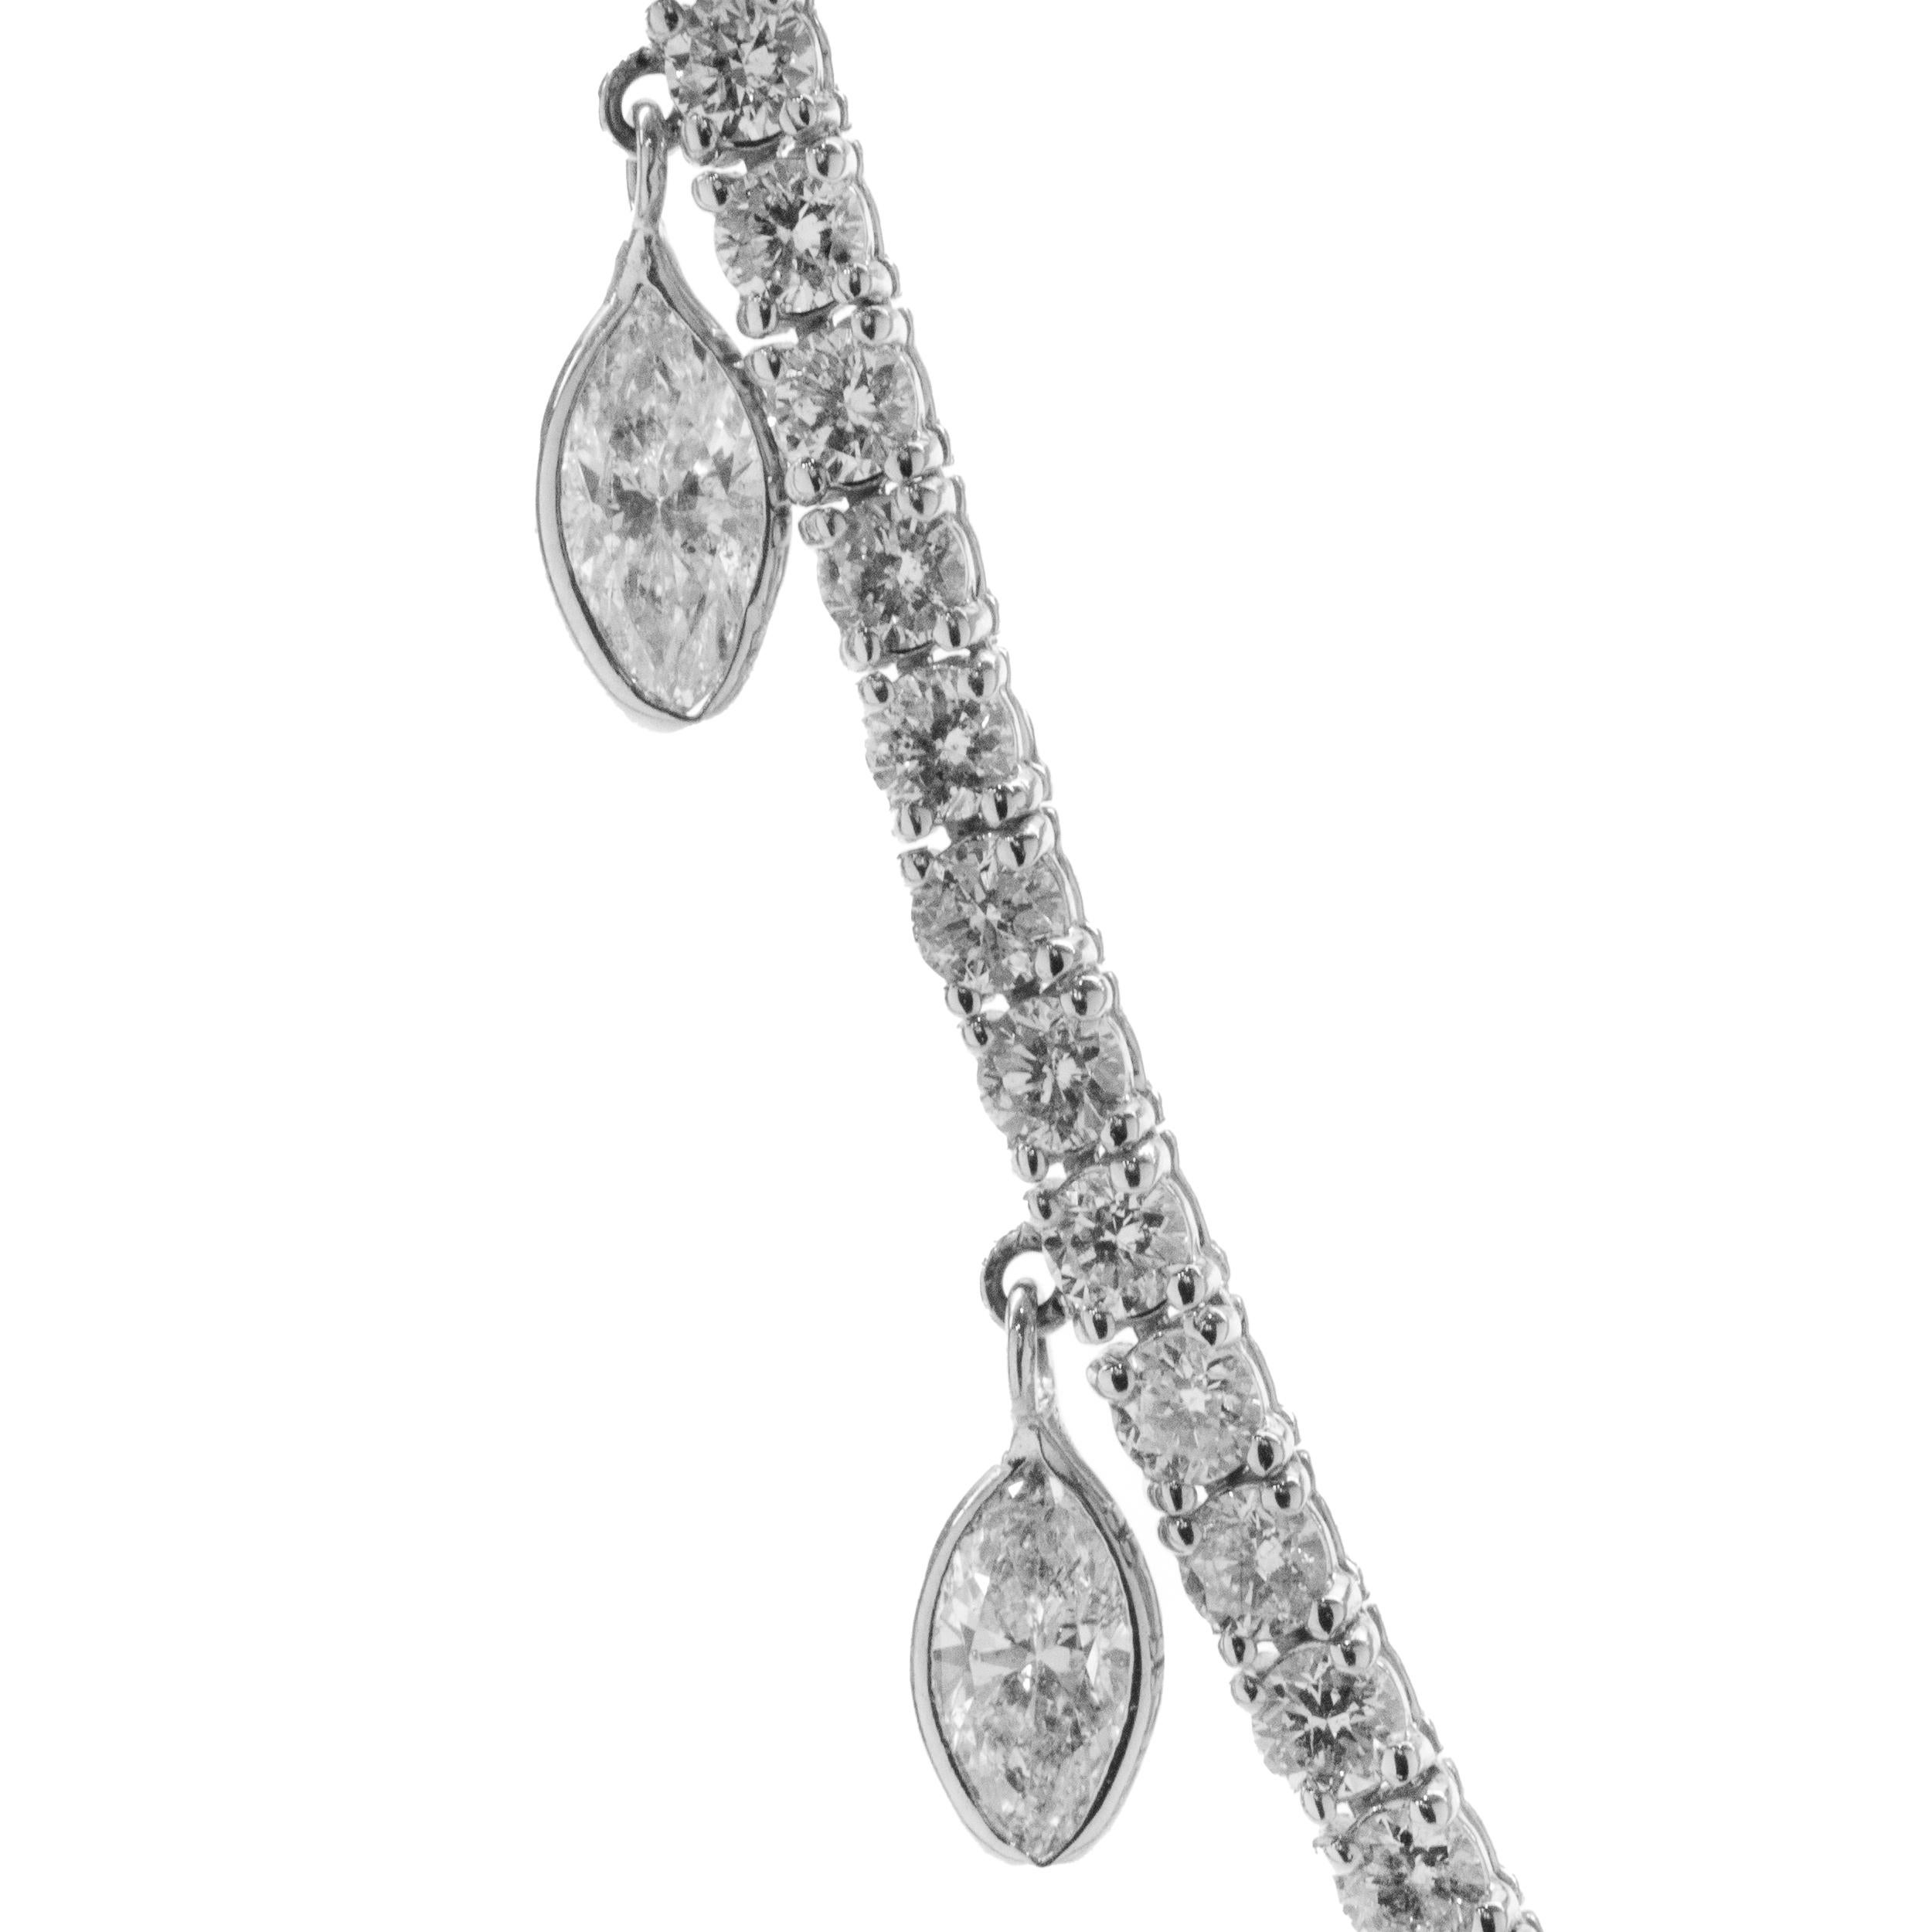 Designer: custom design
Material: 14K white gold
Diamond: round brilliant & marquise cut = 5.50cttw
Color: G / H
Clarity: SI1
Dimensions: necklace adjusts from 16-22-inches in length 
Weight: 9.88 grams